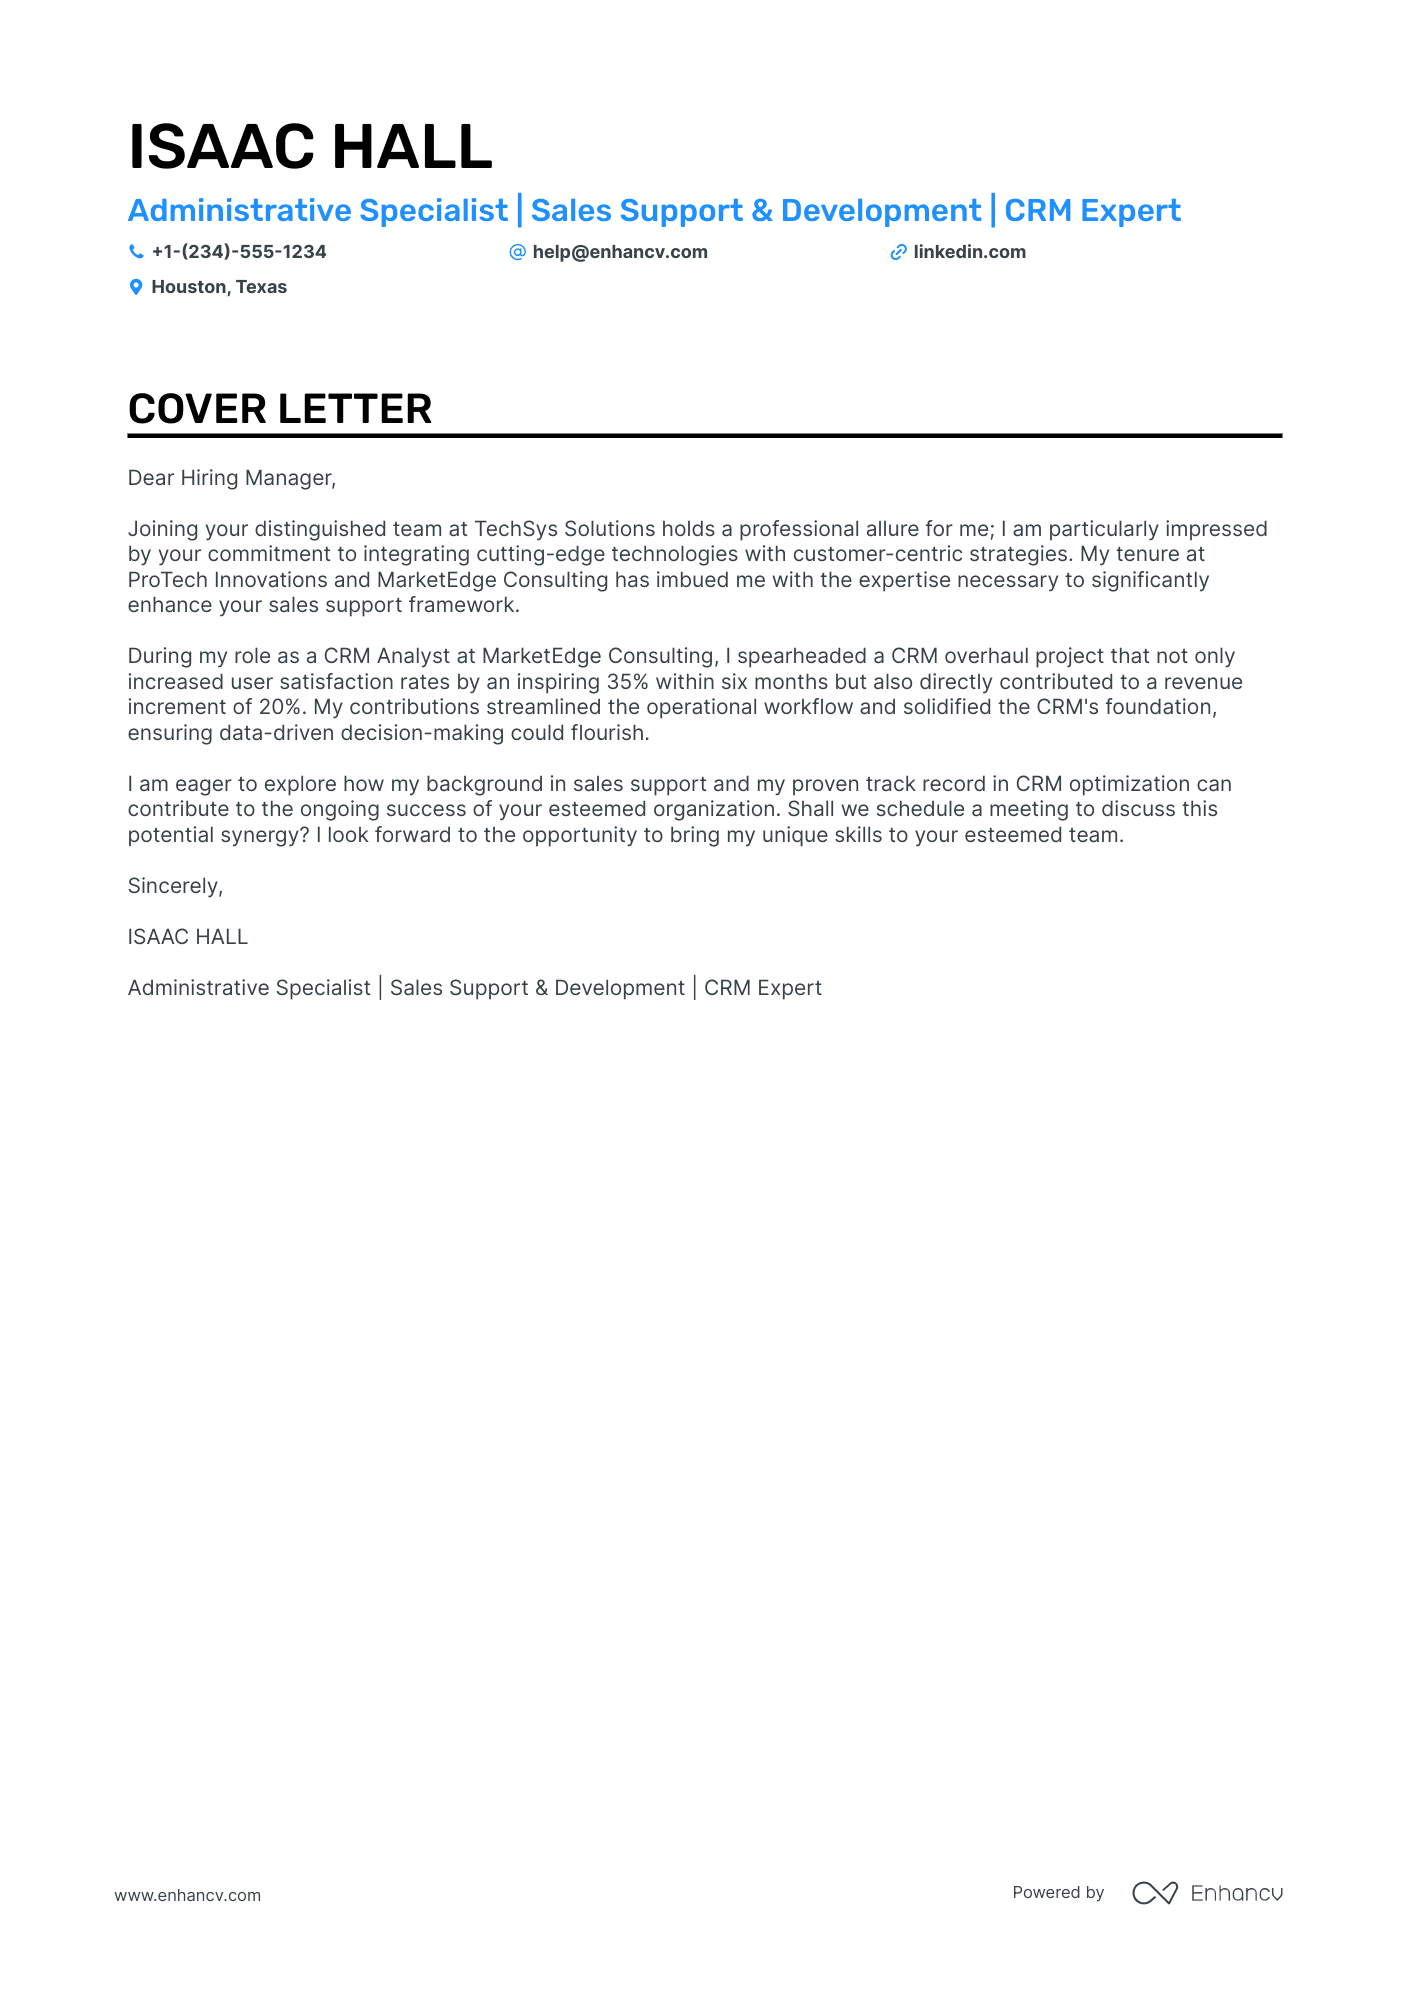 administrative assistant role cover letter